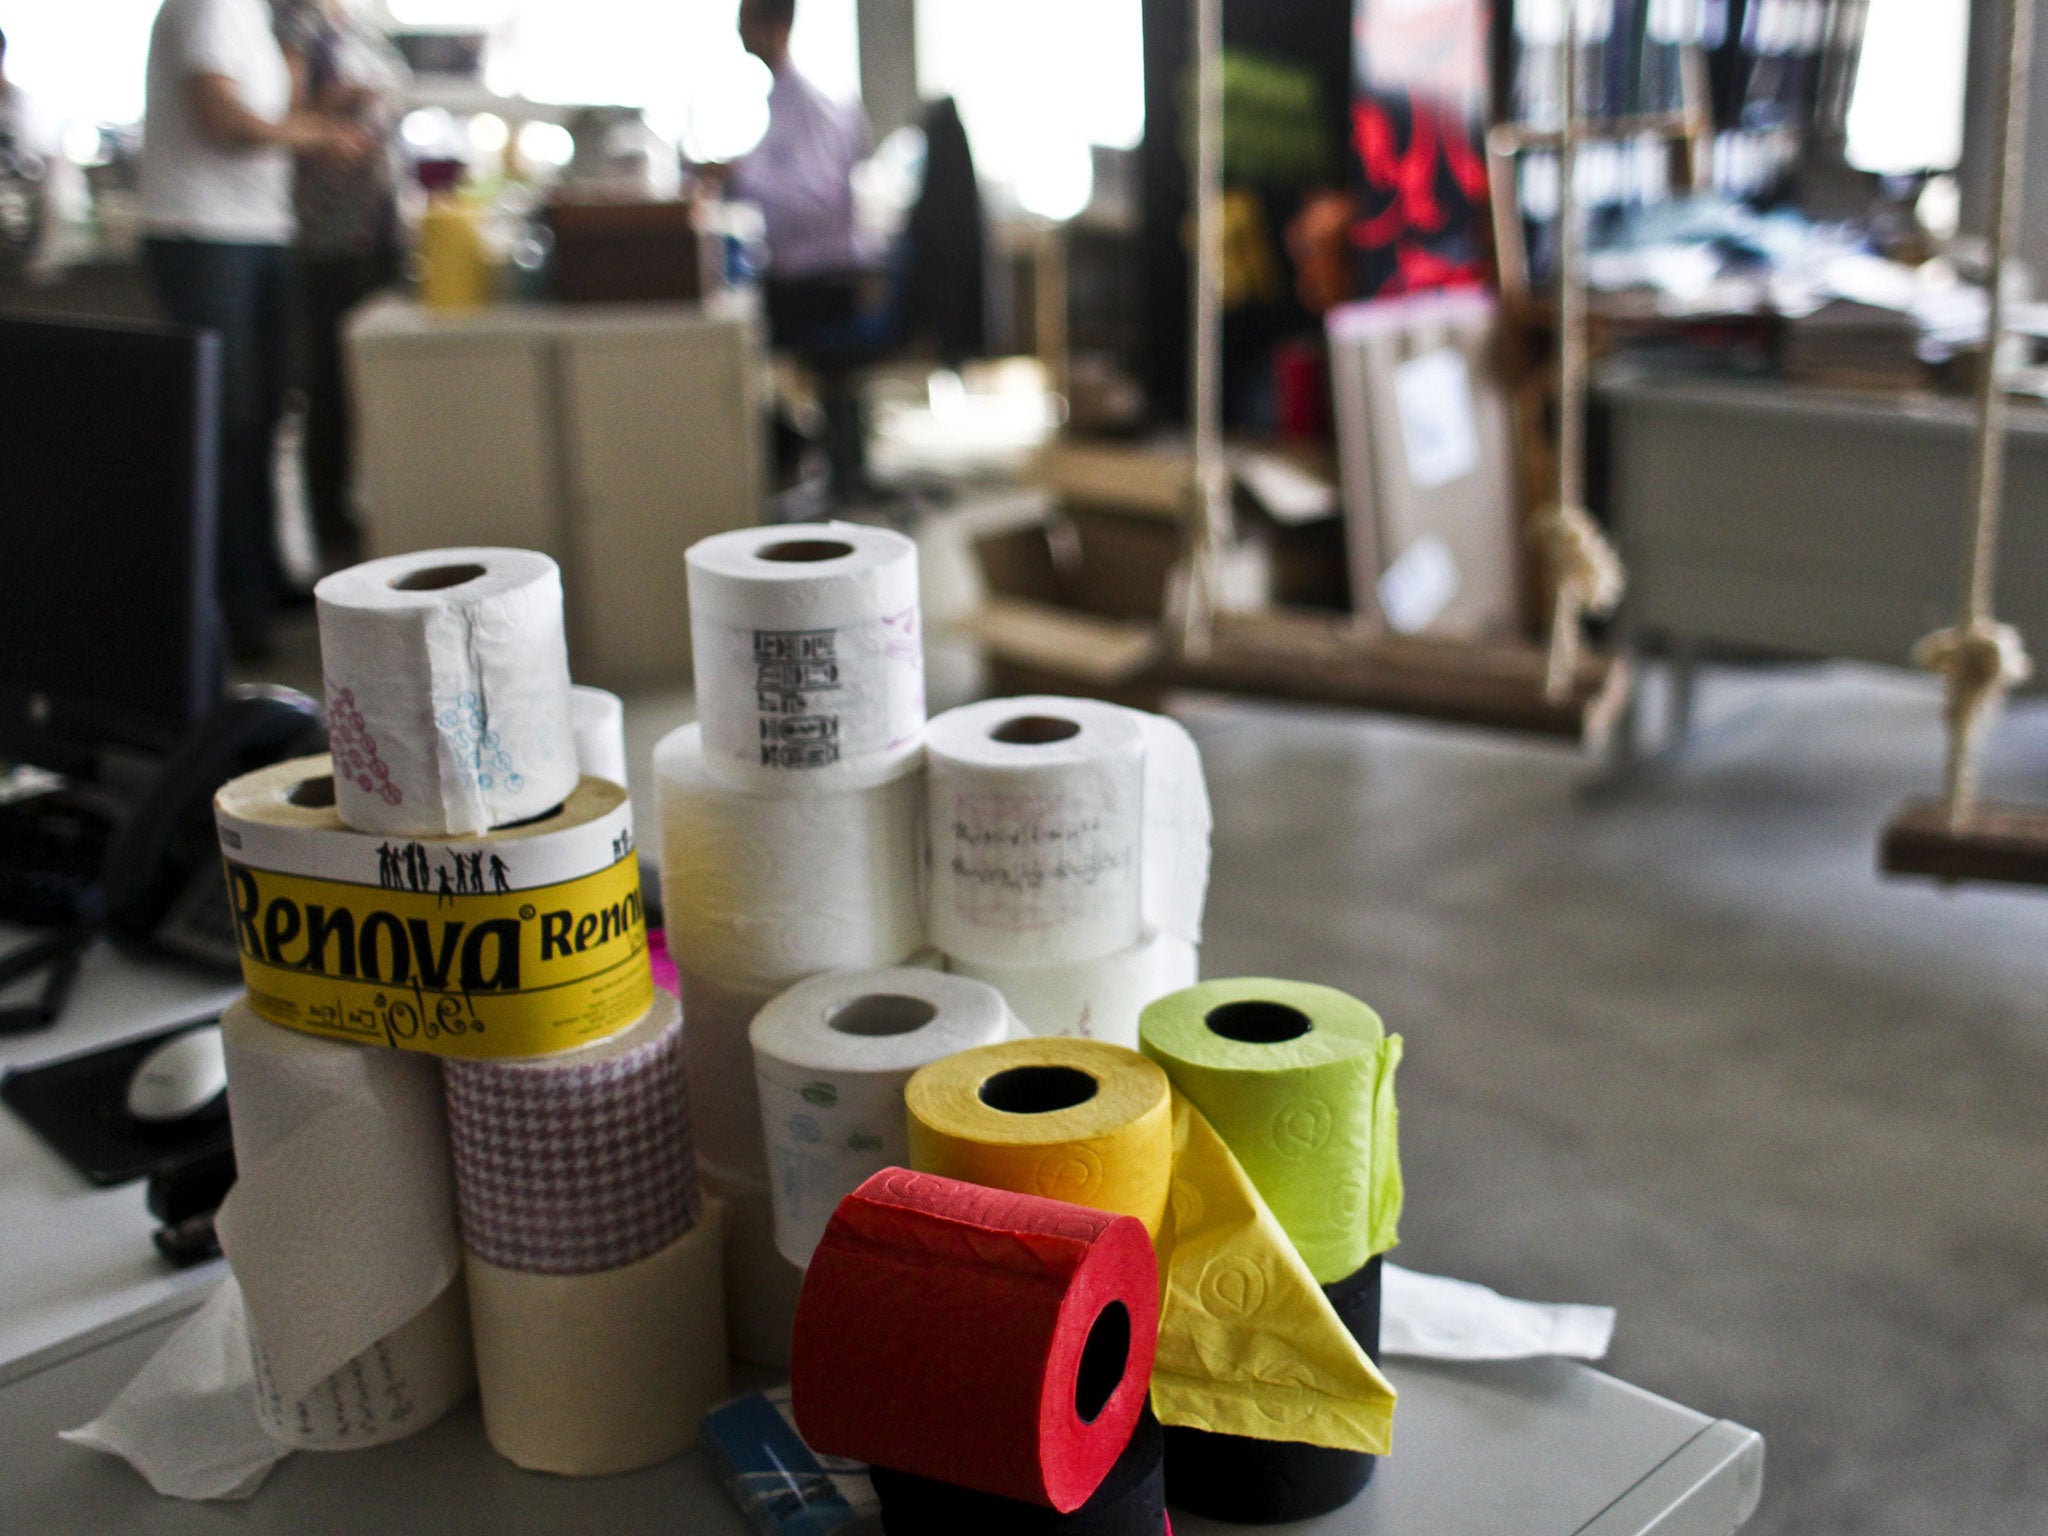 Sitting pretty: Portugal’s Renova has created what it claims is ‘Earth’s sexiest’ toilet paper